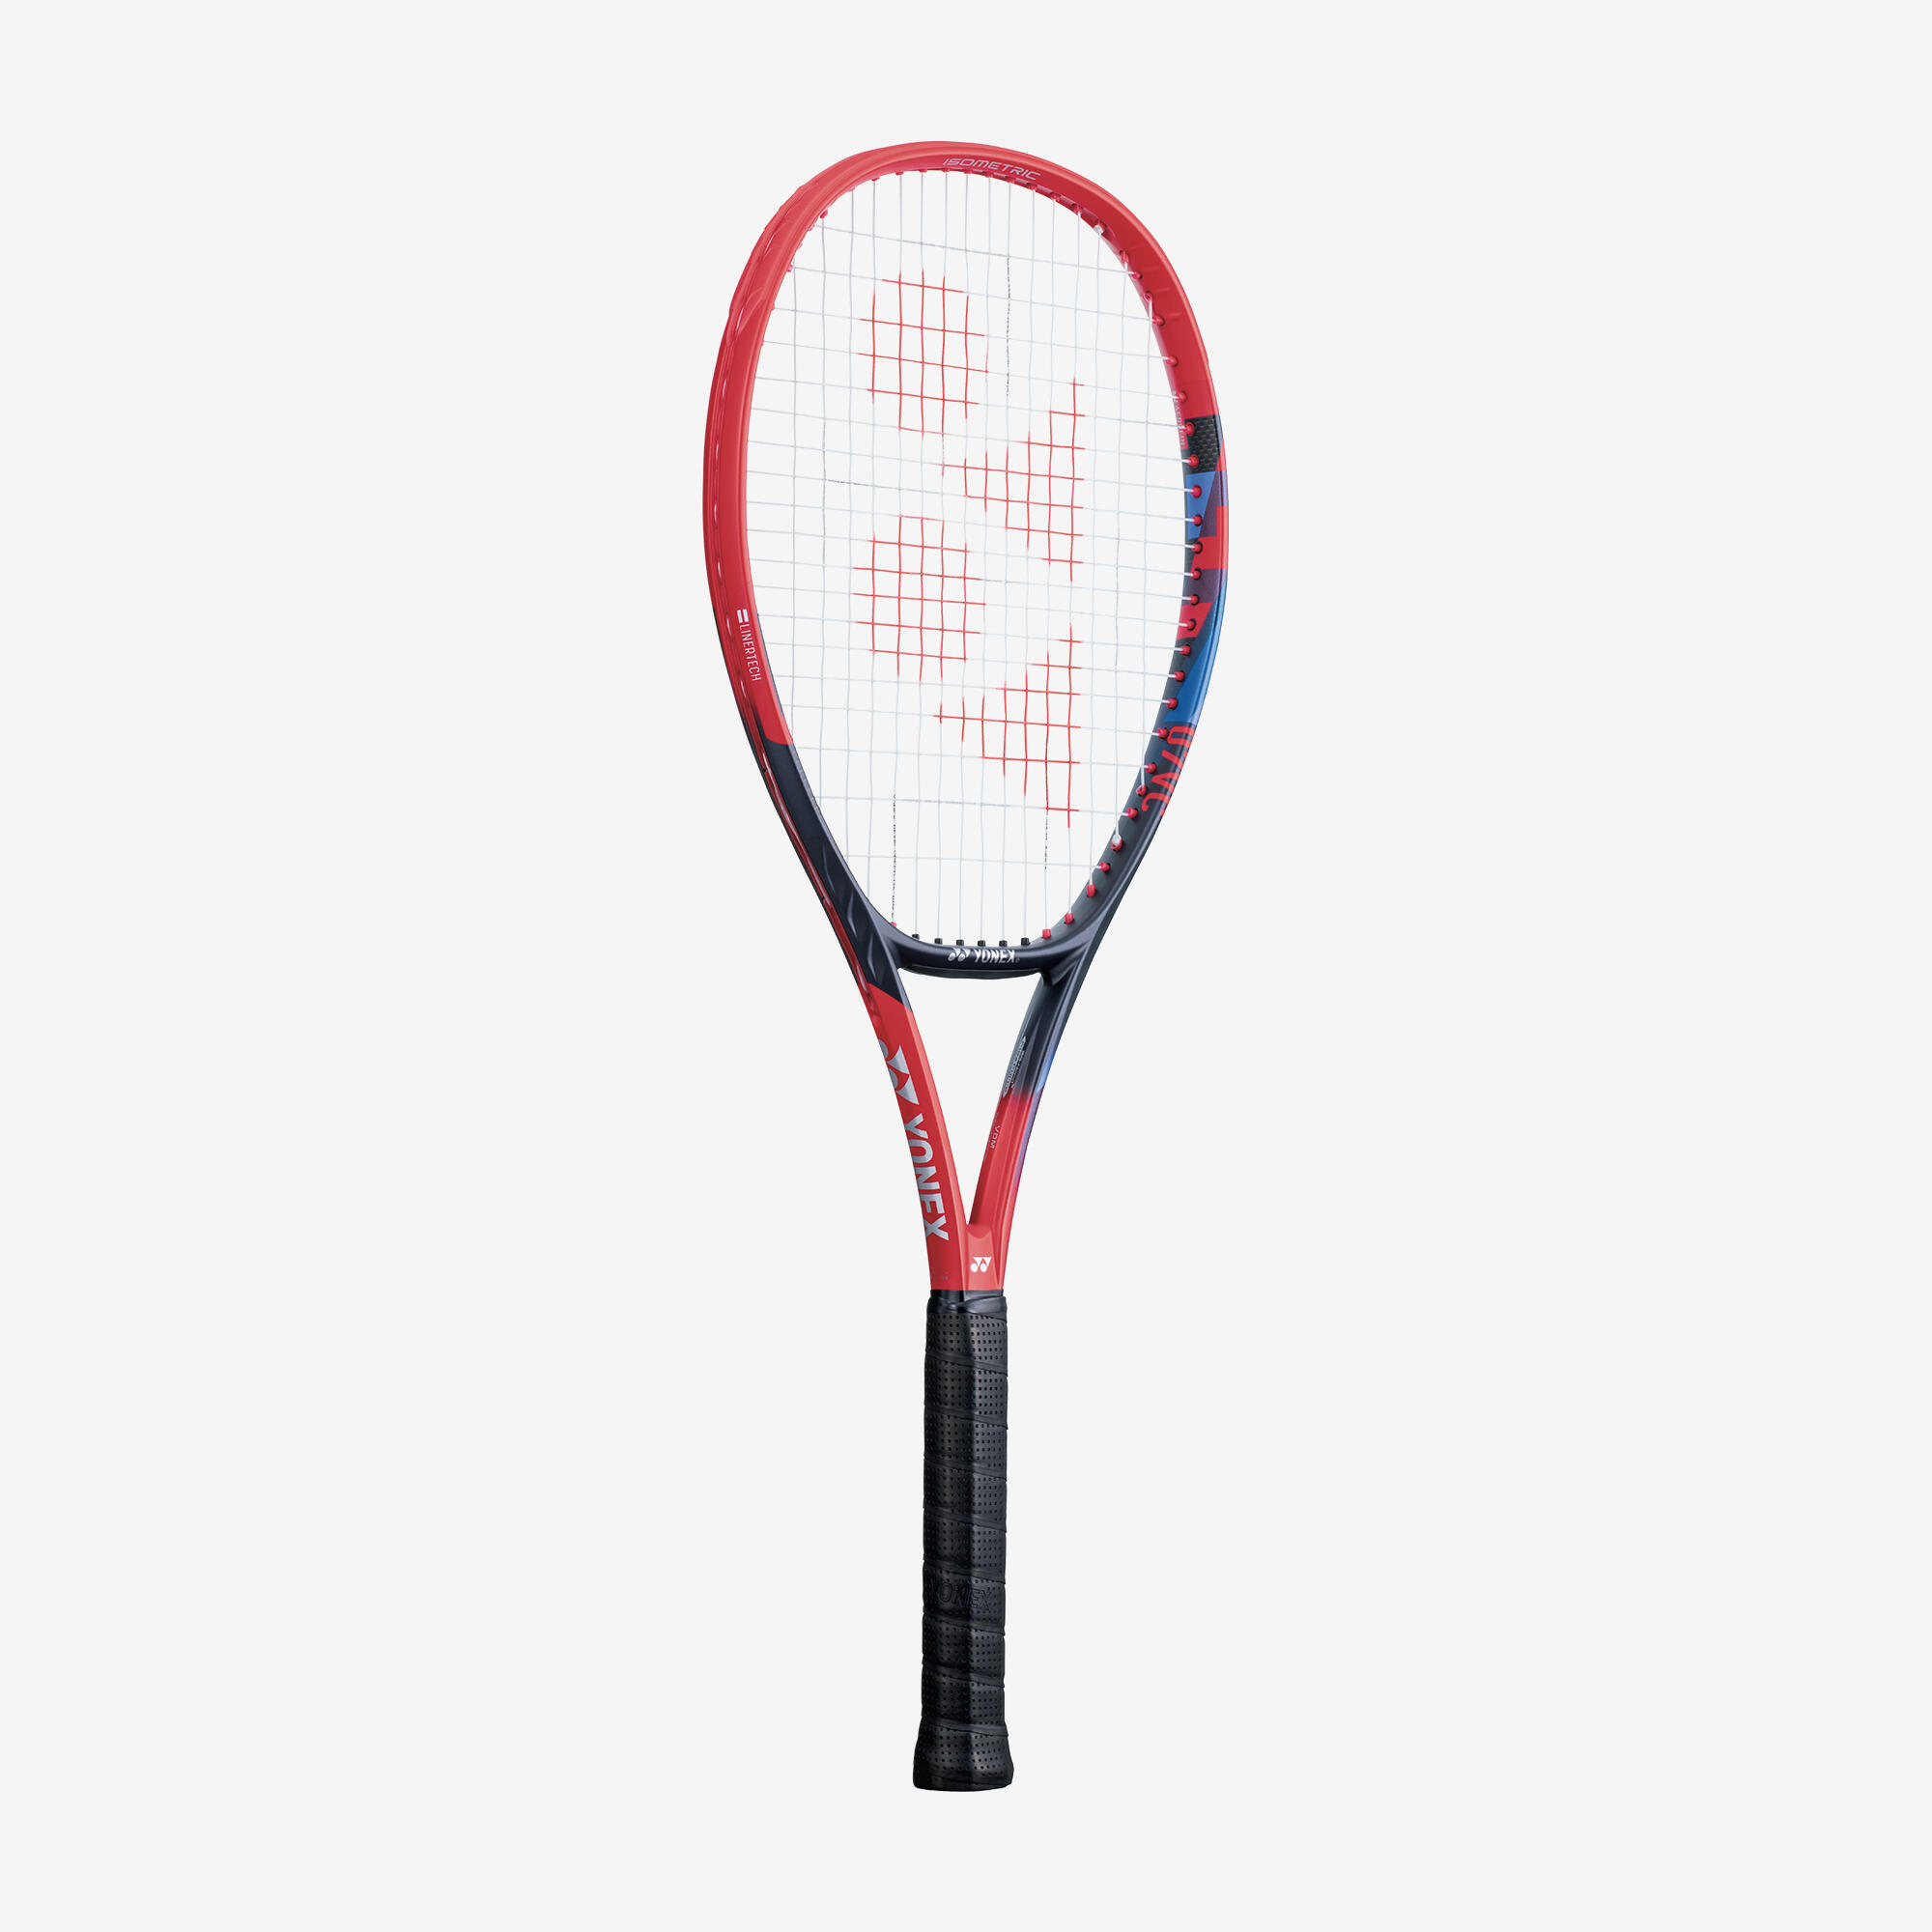 Adult Tennis Racket VCore 100 300g - Red 1/2